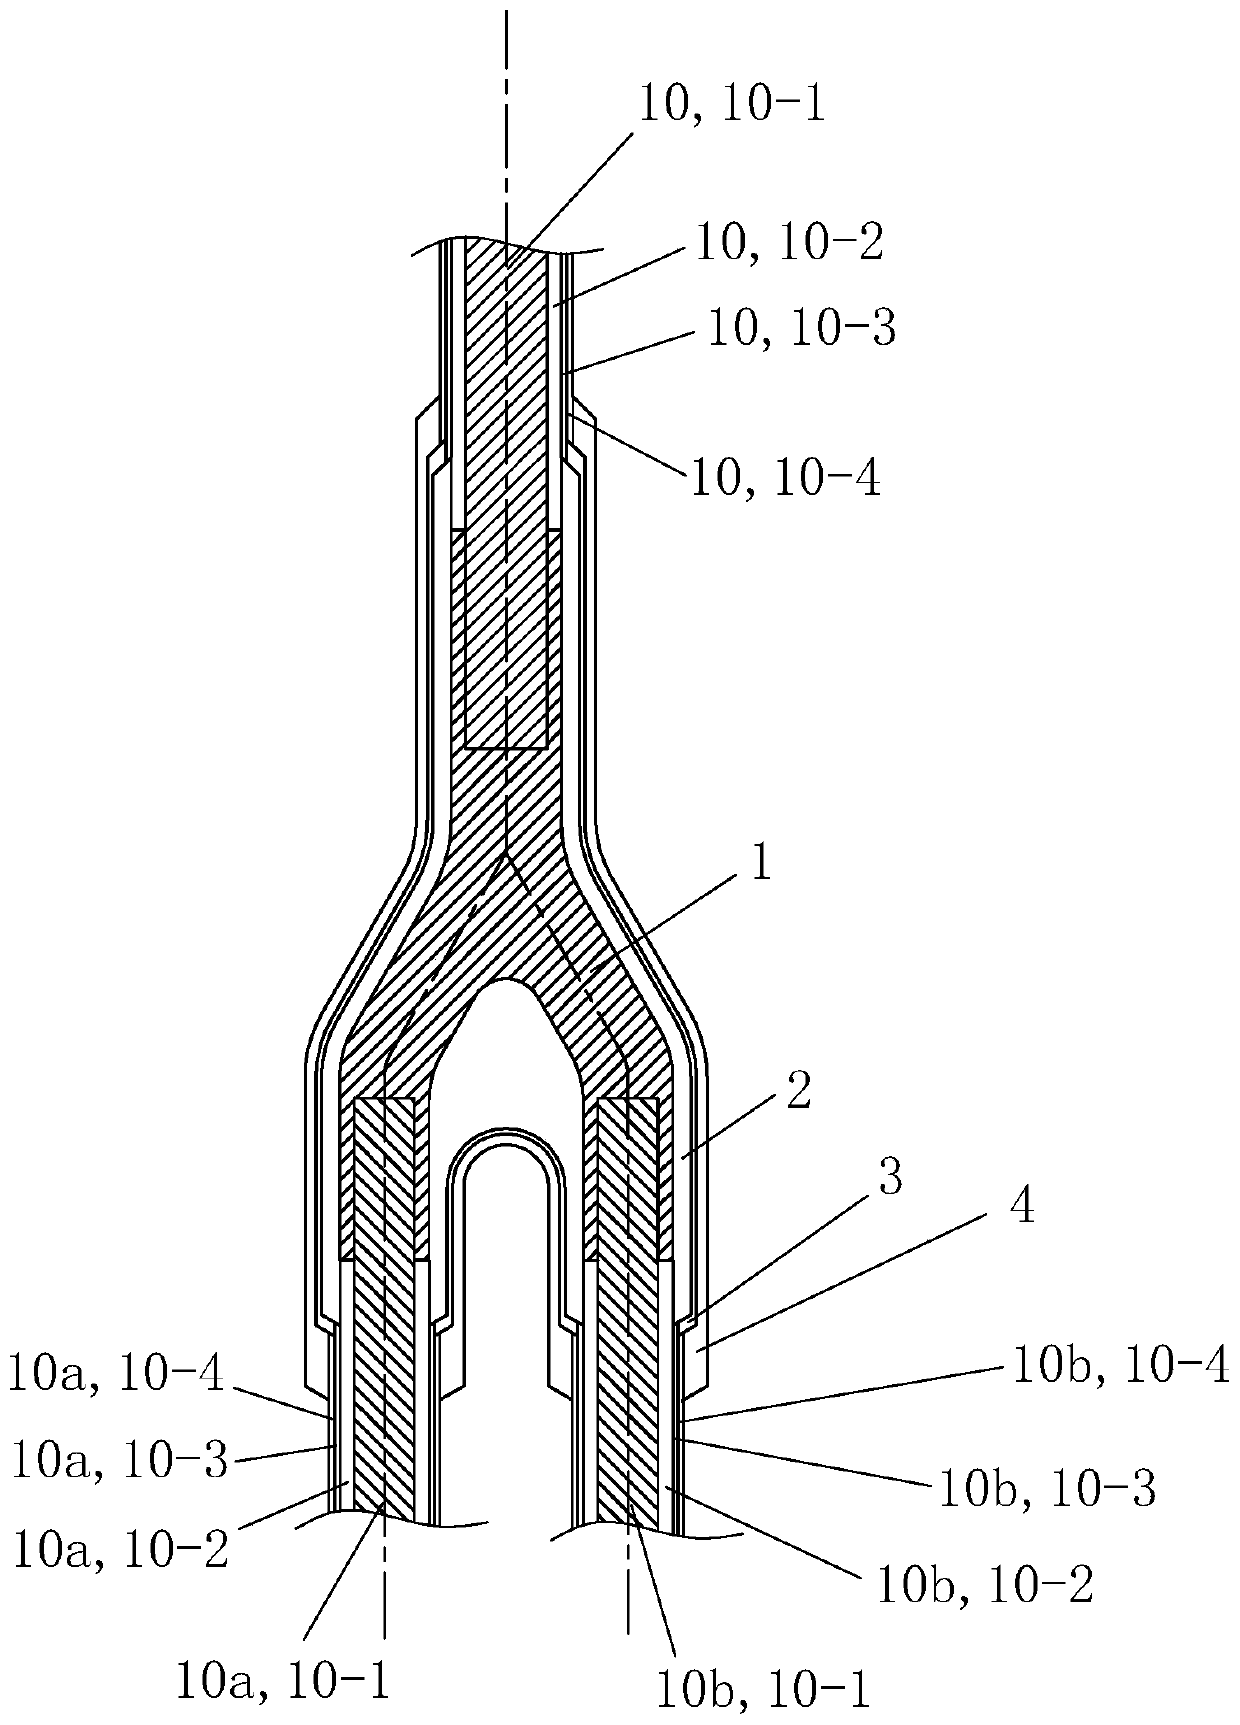 Pre-branched cable and manufacturing method thereof